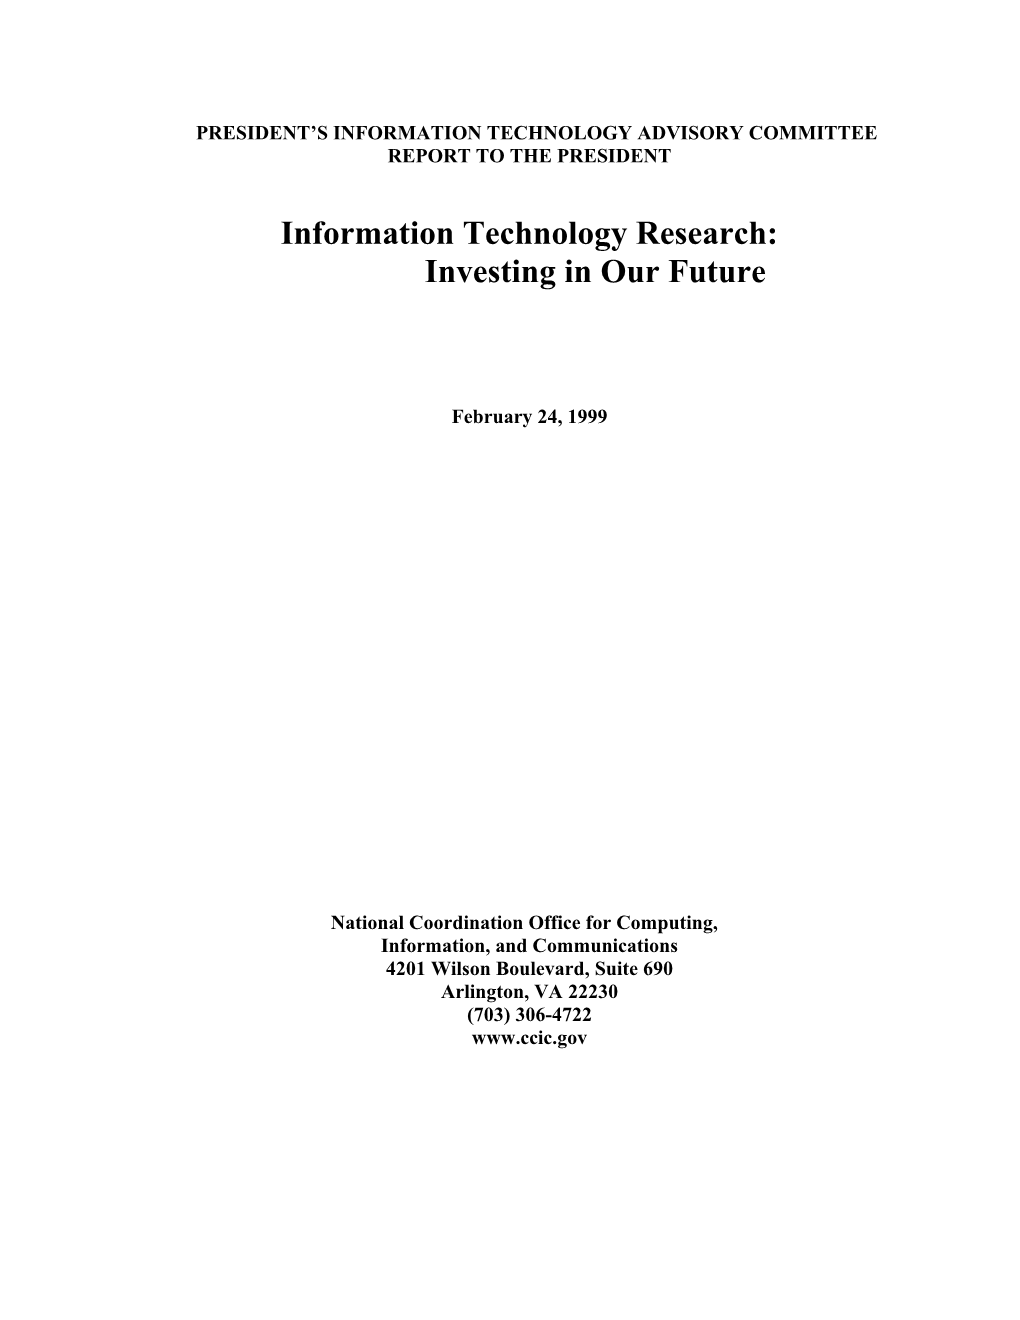 Information Technology Research: Investing in Our Society